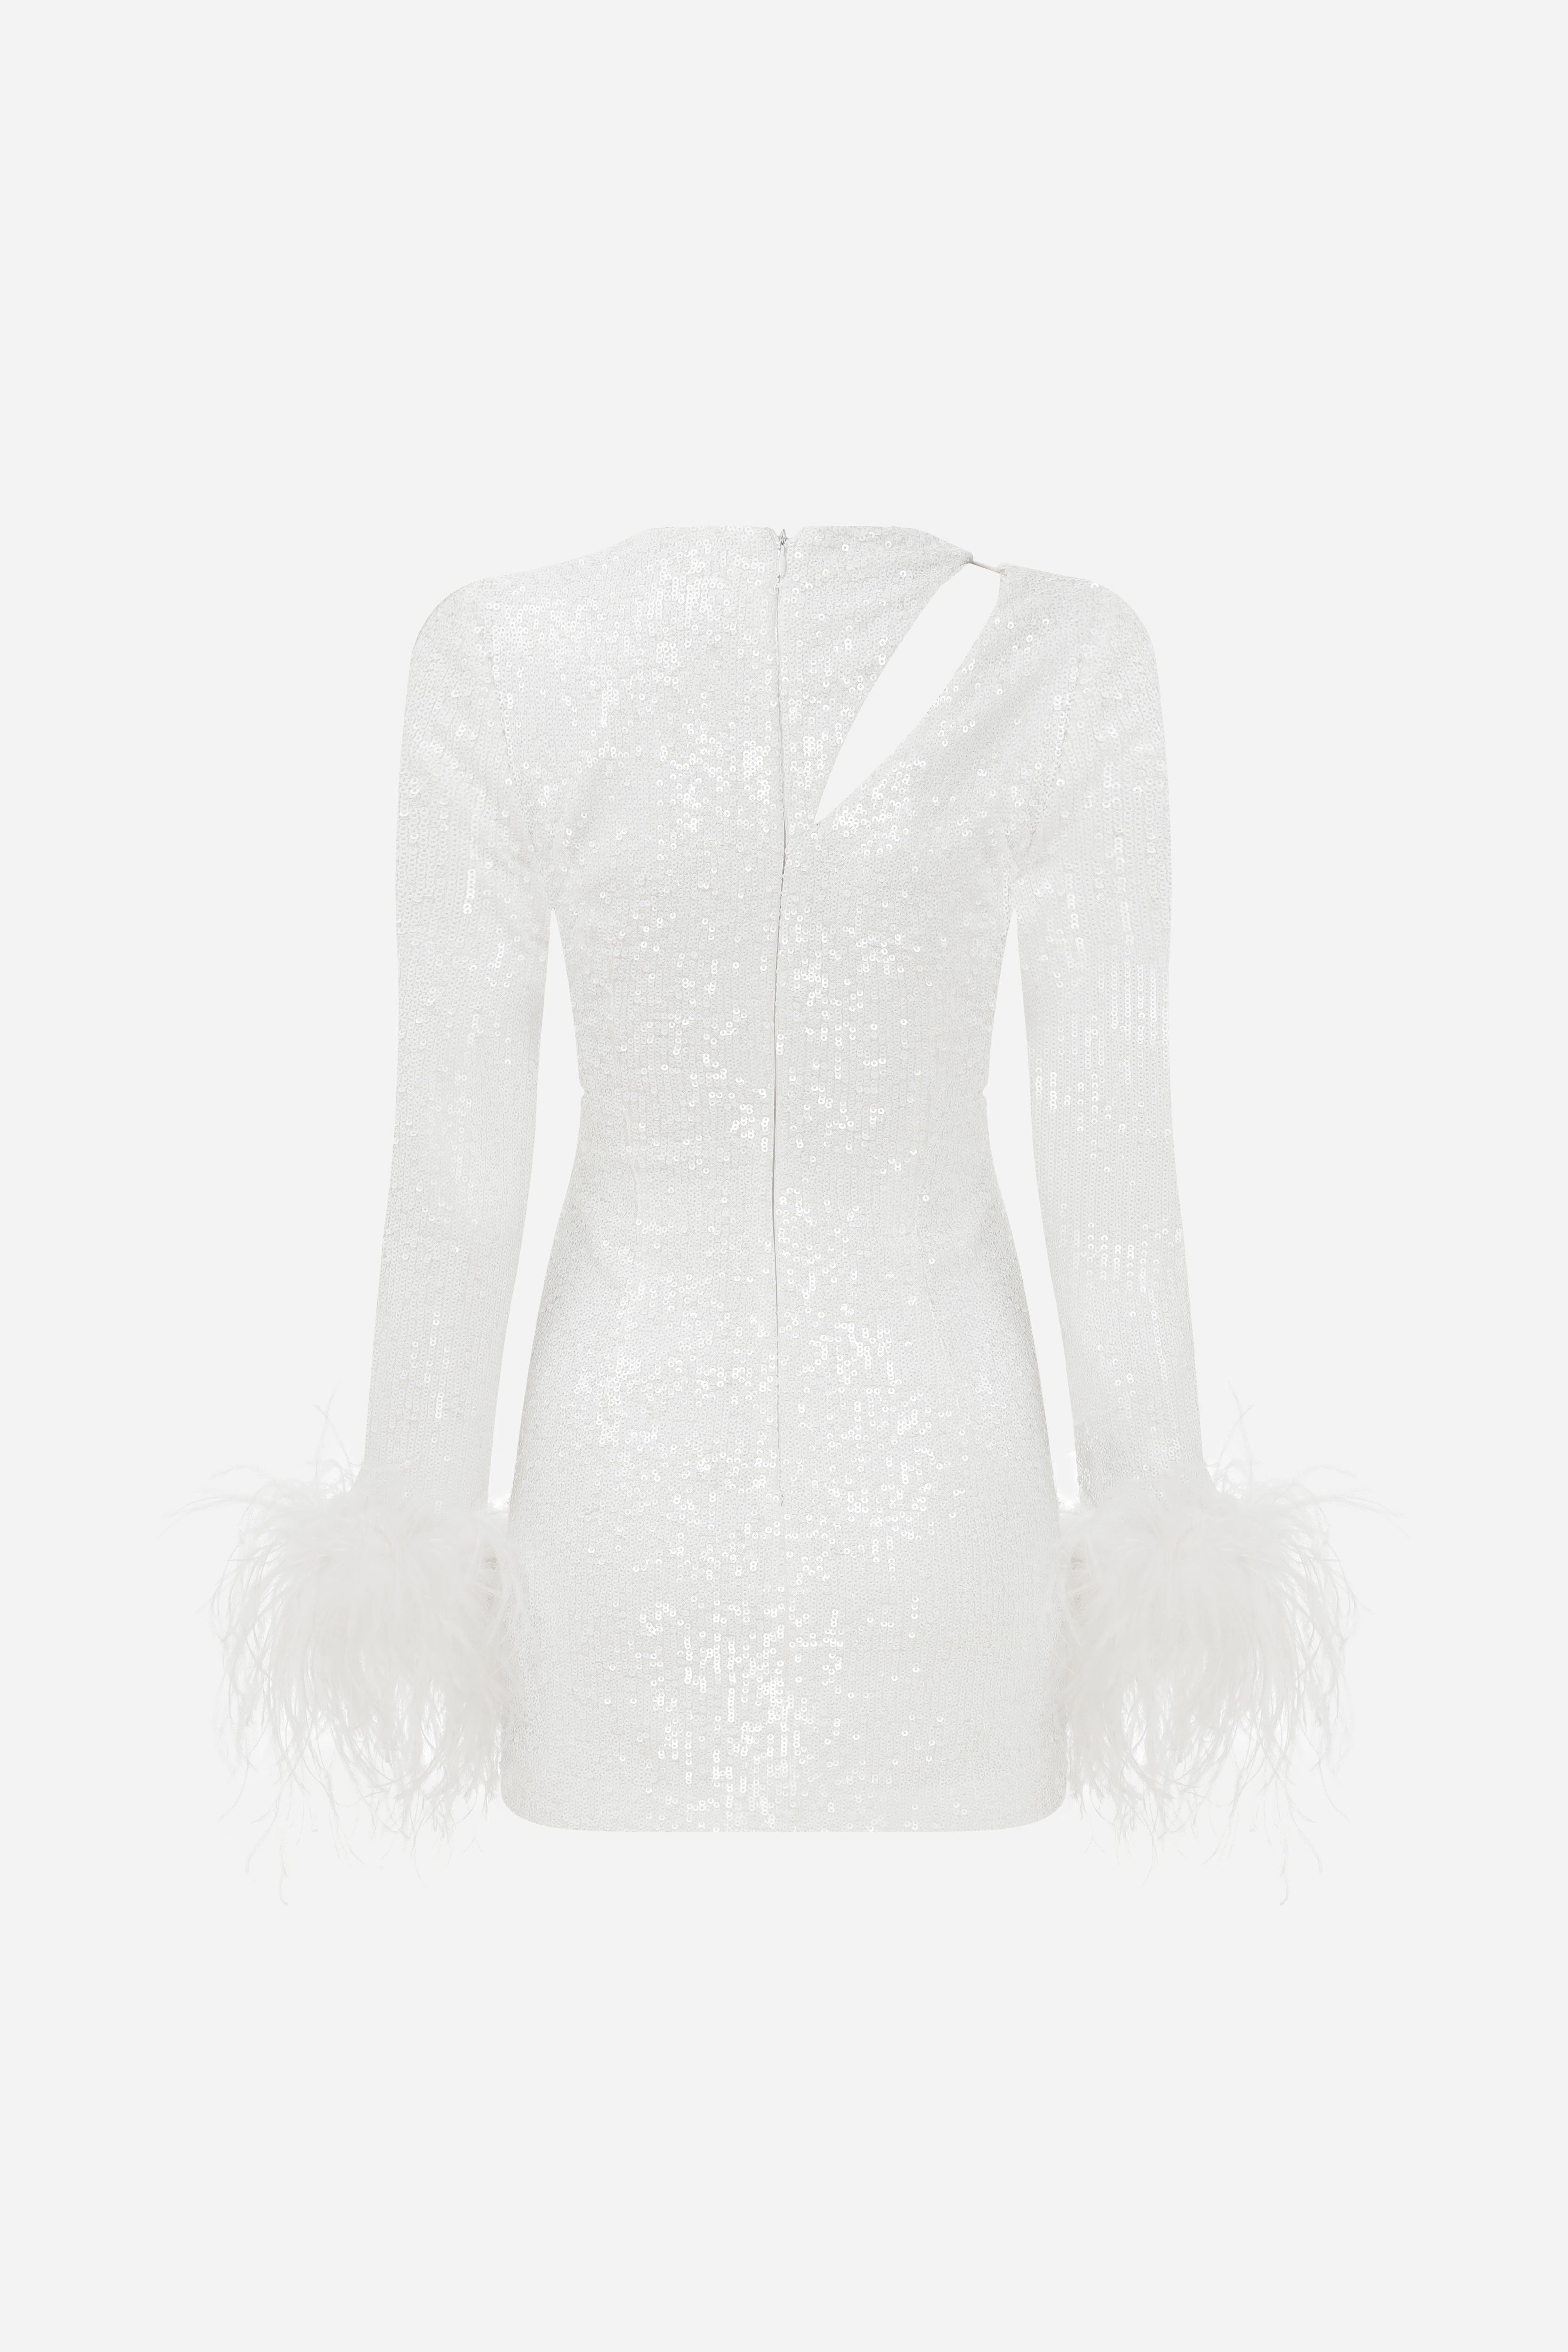 Audrey - Mini Sequin Dress with Cutout Details on Shoulder and Feather Trim on Sleeves